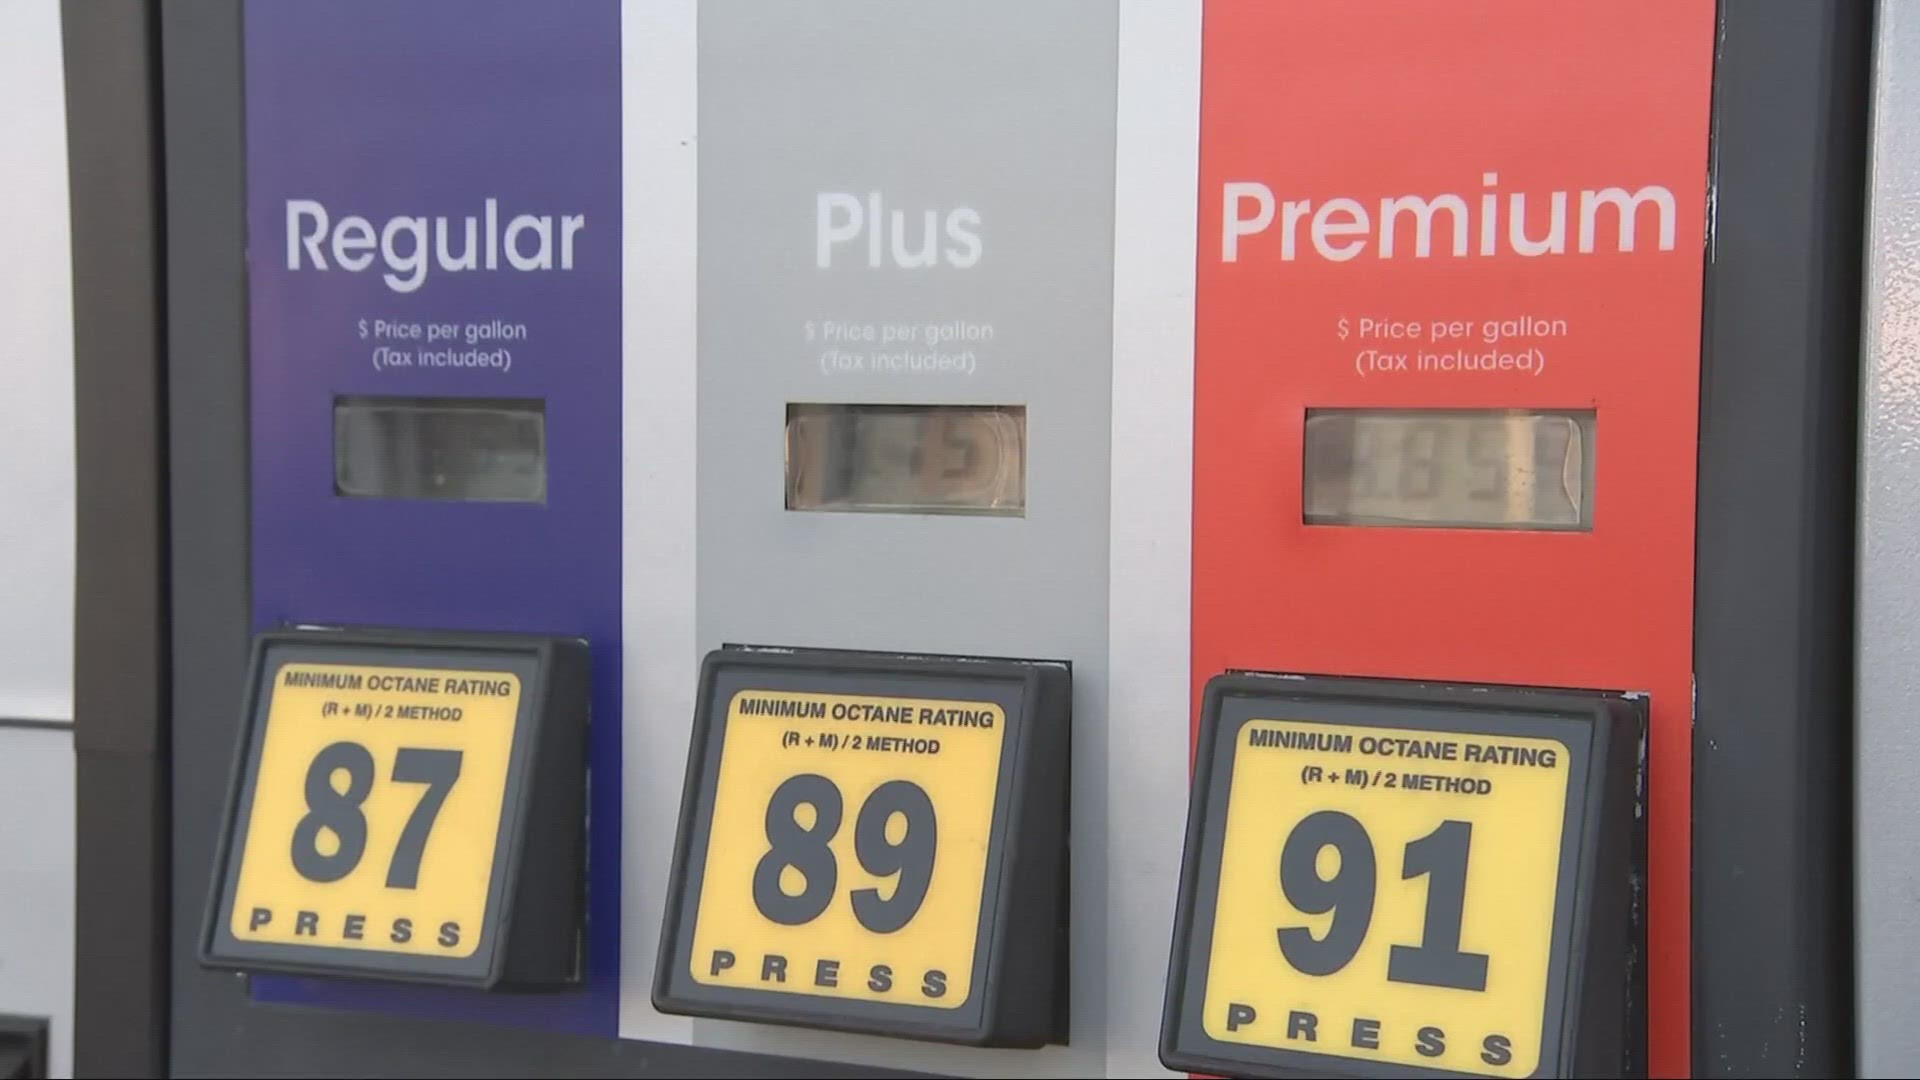 The price here in Northeast Ohio is well below the national average.